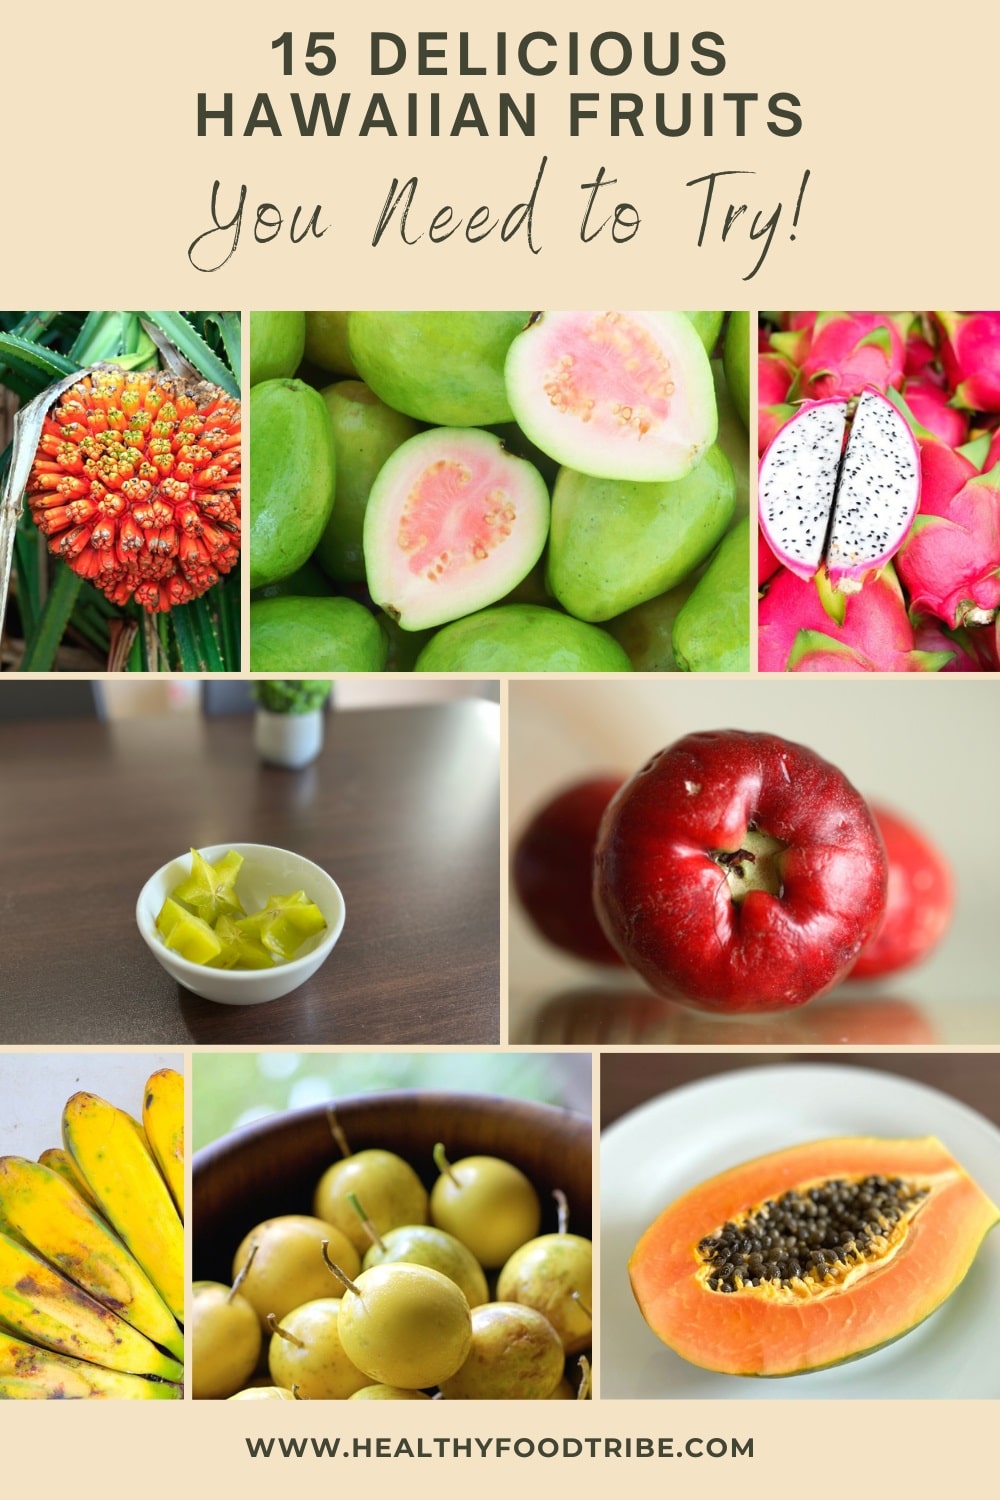 15 Delicious Hawaiian fruits you need to try